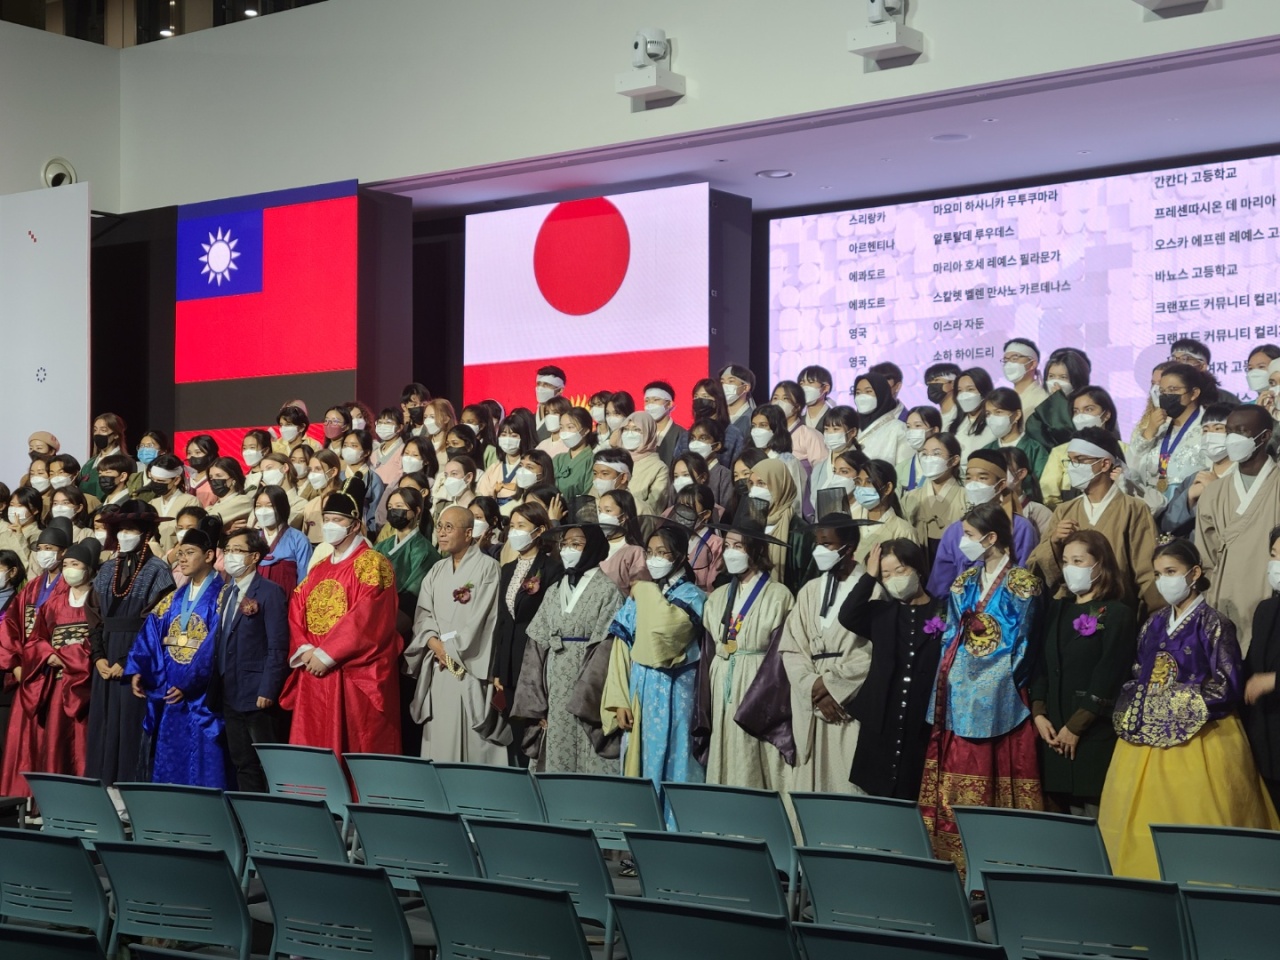 Participants of the 2022 International Korean Education Youth Camp pose for photos at Hana Global Campus in Cheongna International City in Incheon on Thursday. (Jung Min-kyung/The Korea Herald)